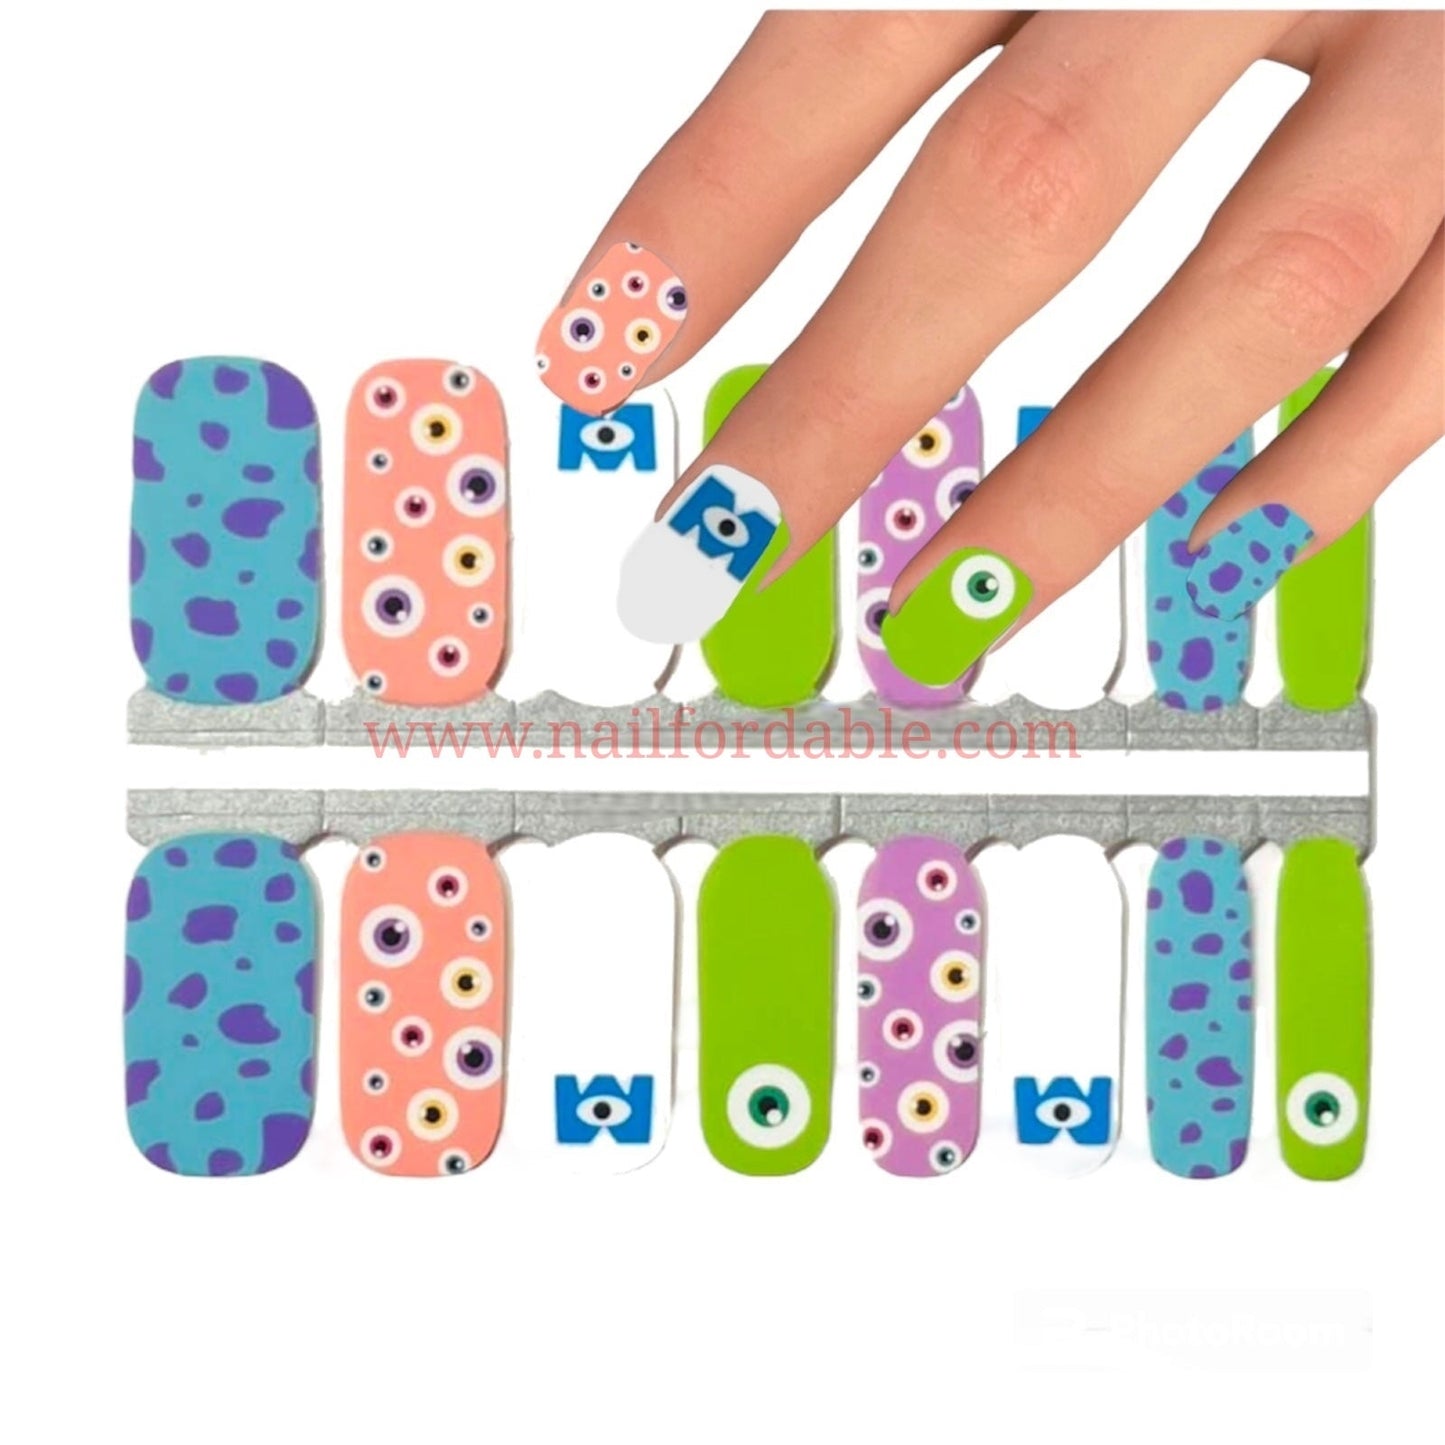 Monsters Inc Nail Wraps | Semi Cured Gel Wraps | Gel Nail Wraps |Nail Polish | Nail Stickers